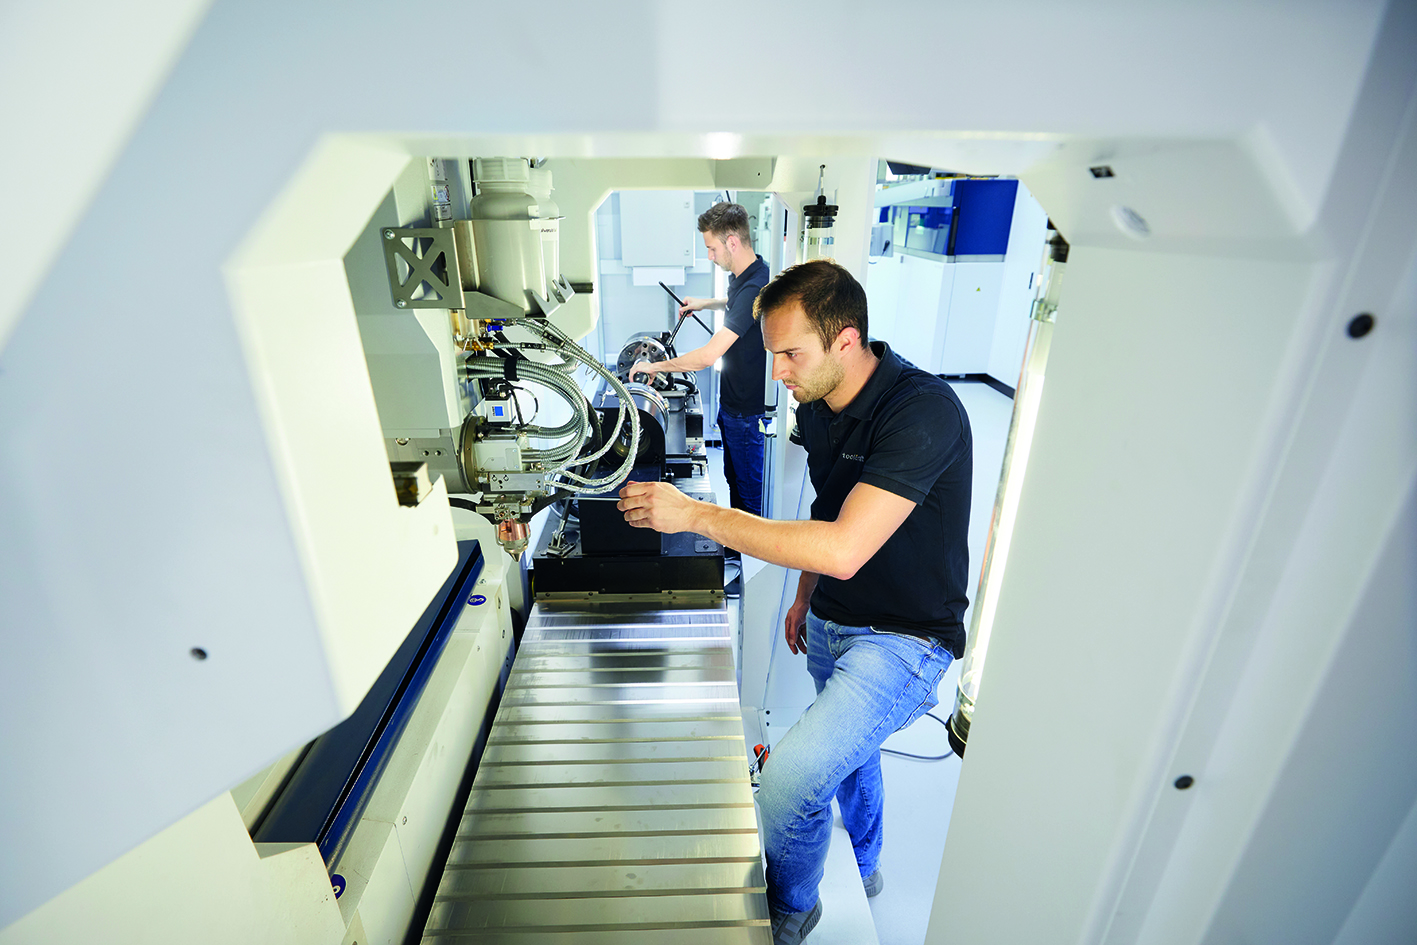 Efficient: Expensive non-productive time can be reduced because several toolcraft employees – here Jonathan Krauß and Florian Schlund – can work on the TruLaser Cell 3000 at the same time.